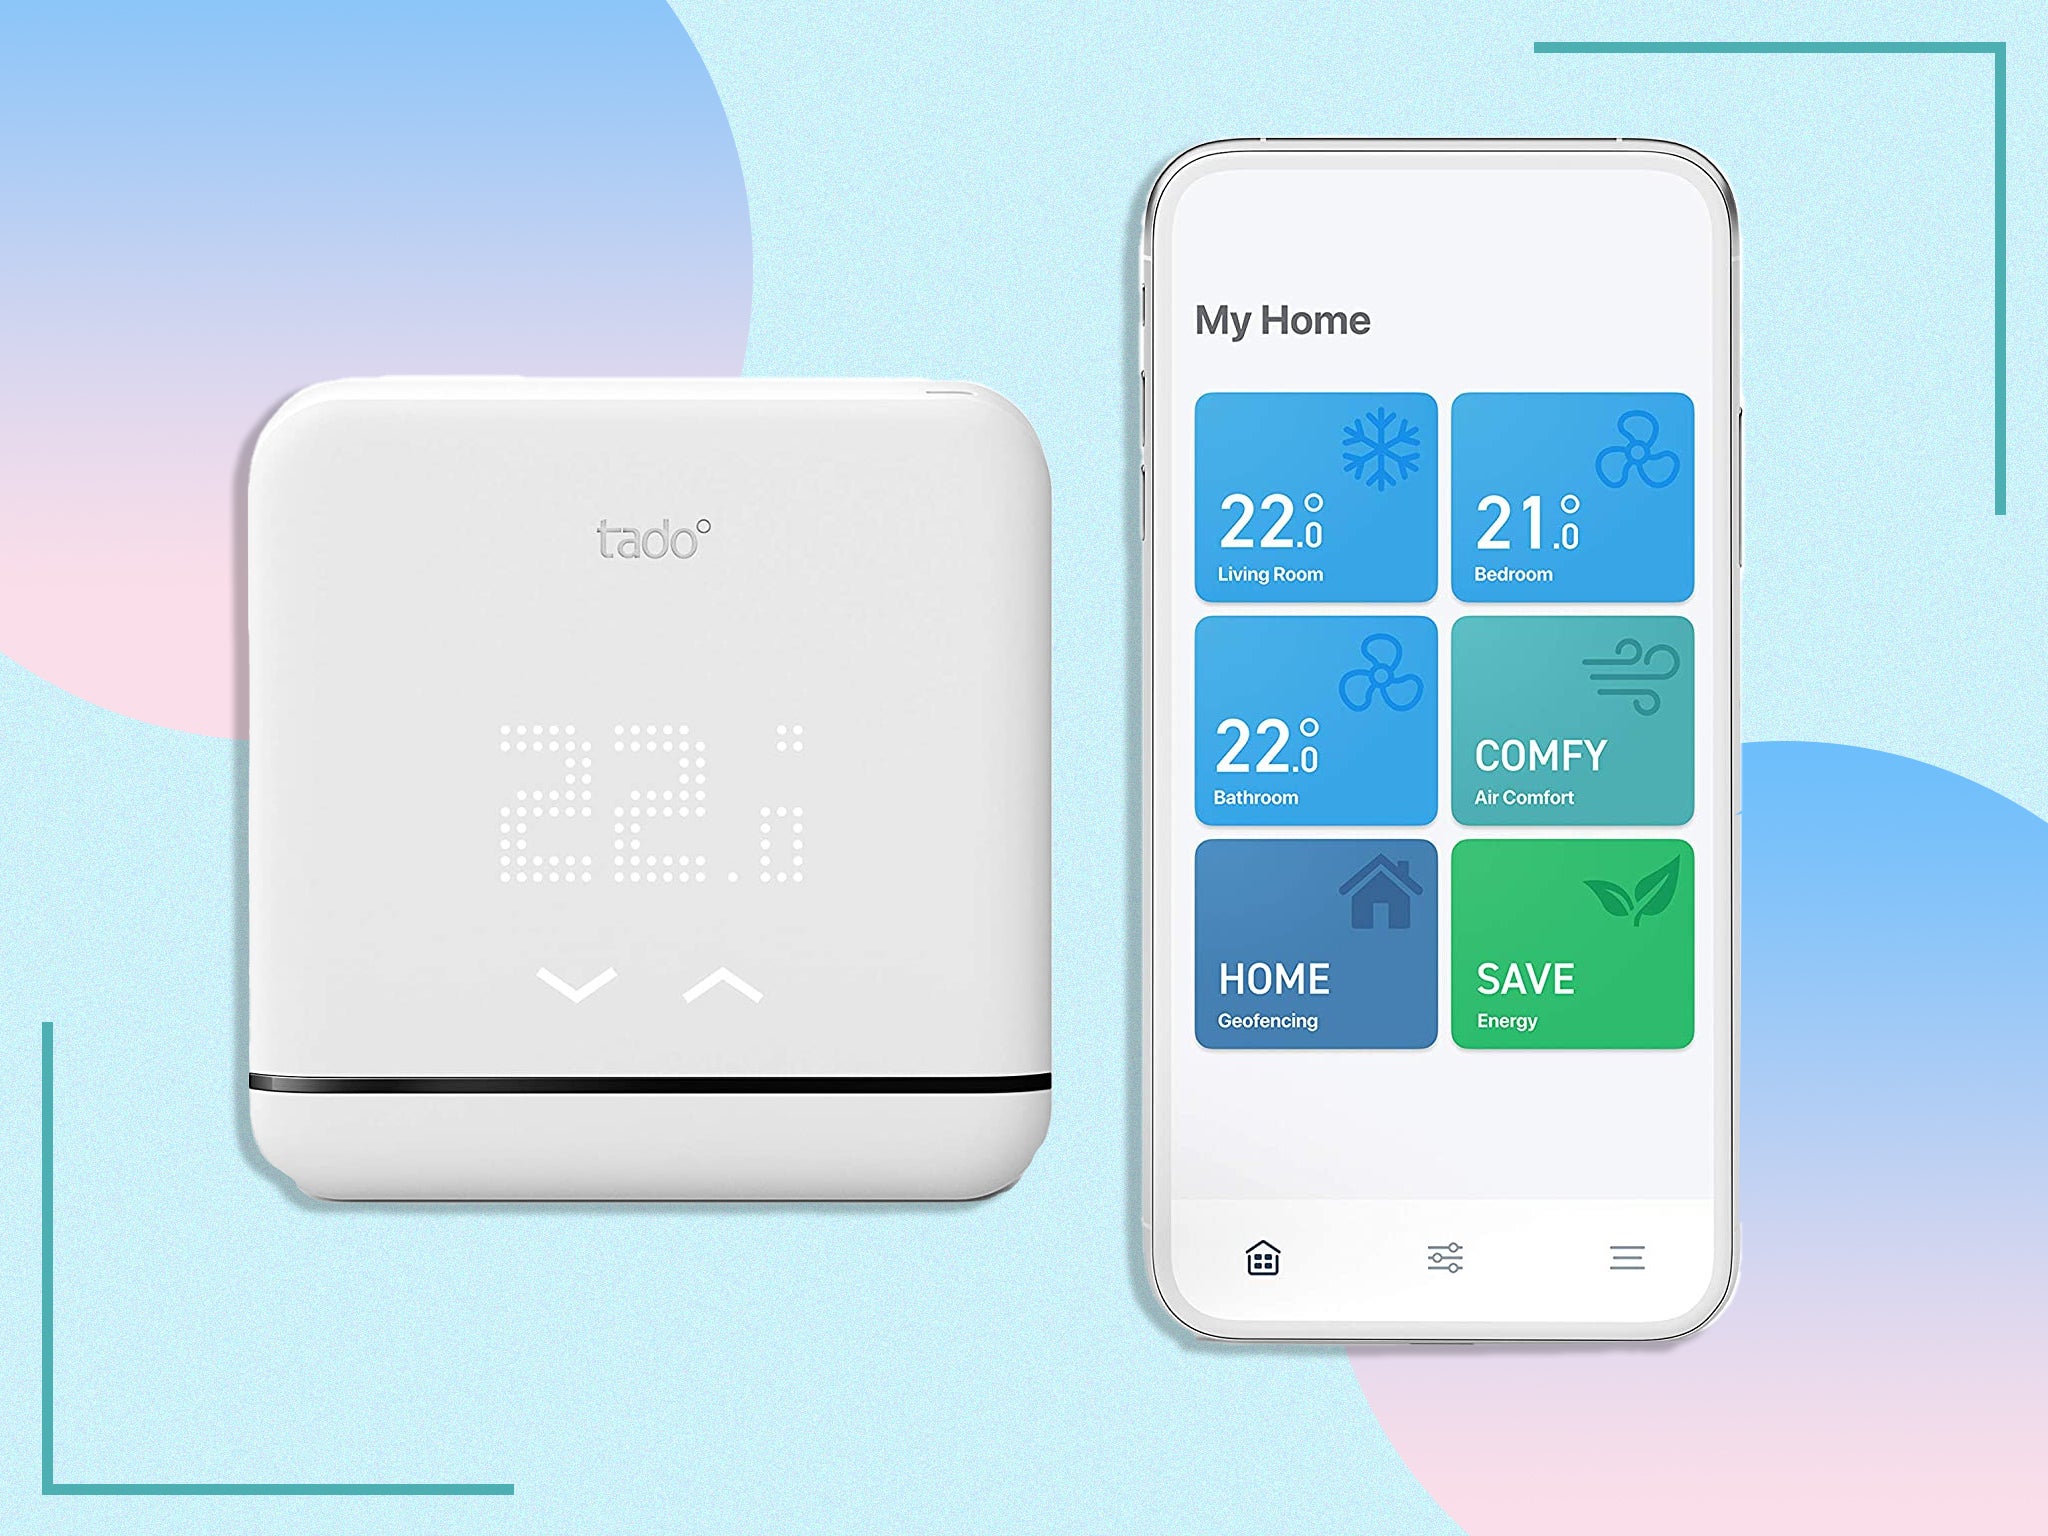 The Tado app can bring together heat pumps and other smart home tech